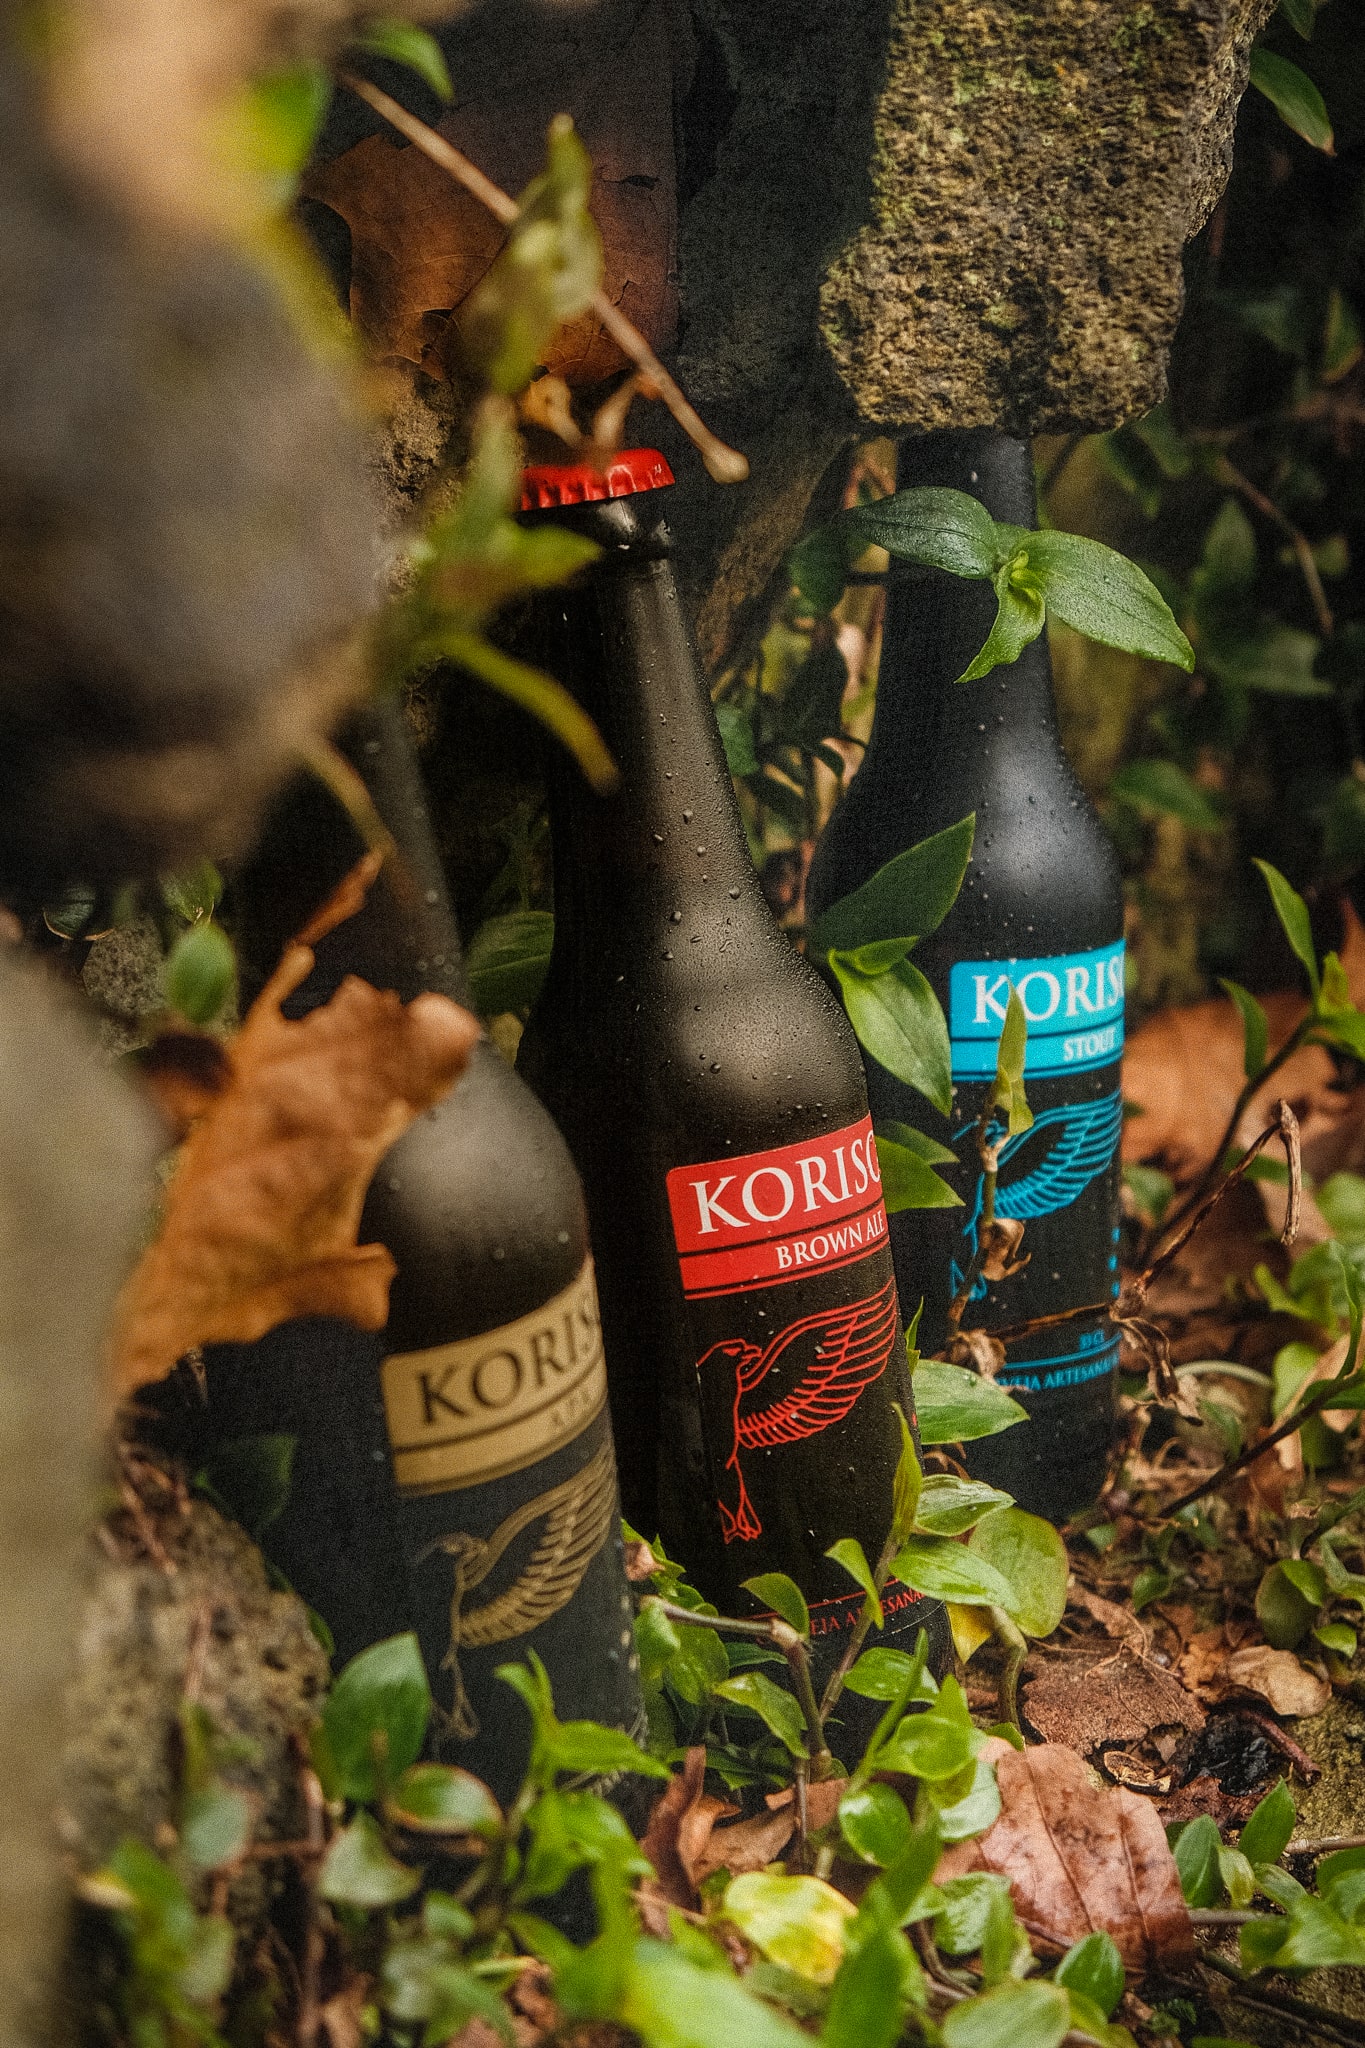 Azorean craft beer Korisca Clássica II (APA), Korisca Clássica I (Brown Ale) and Korisca Clássica III (Stout), with brown and green vegetation and dark stone, São Miguel, Azores.